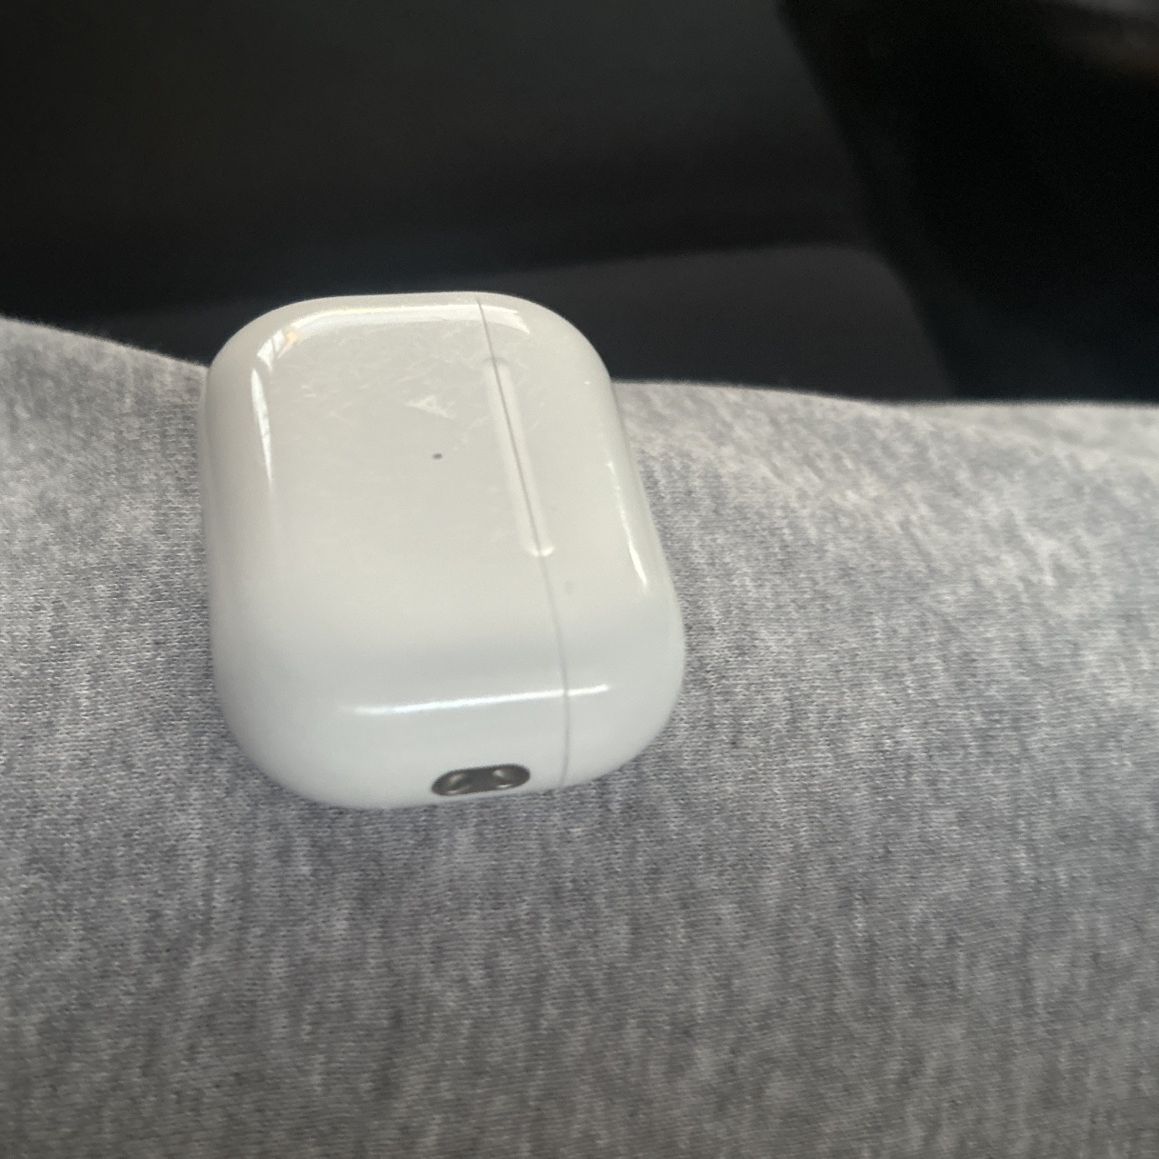 AirPods Newest Generation